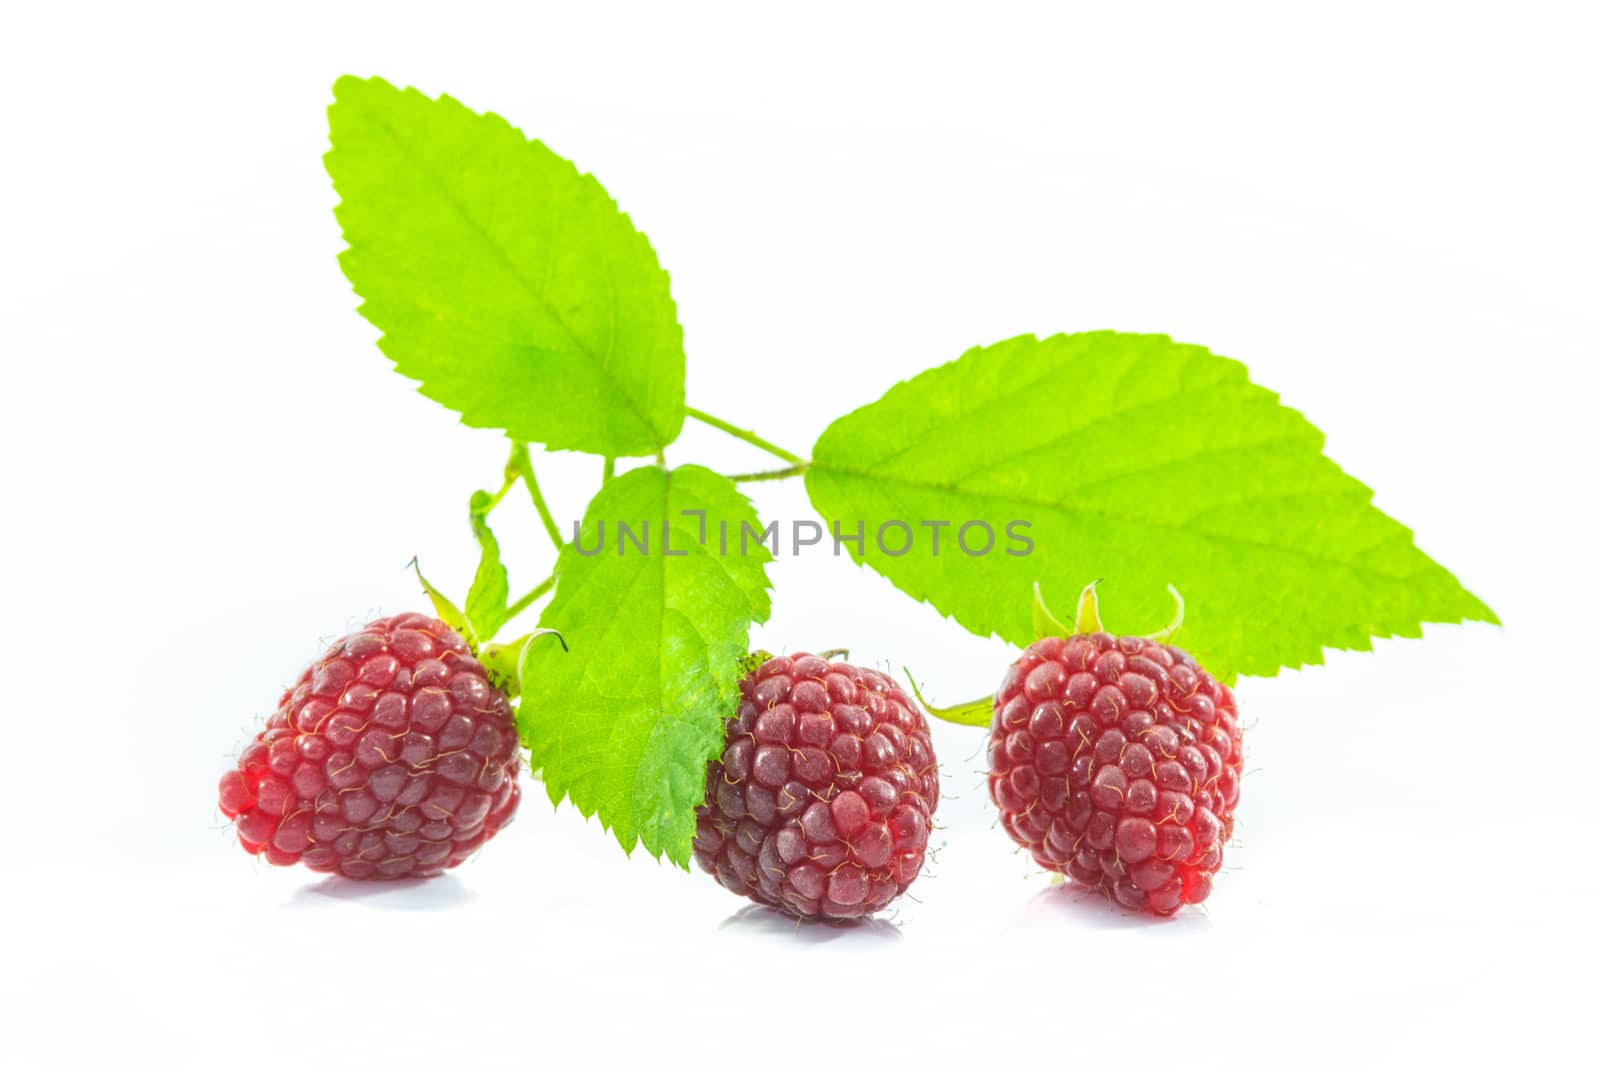 Sprig of fresh raspberry and green leaf isolated on a white background